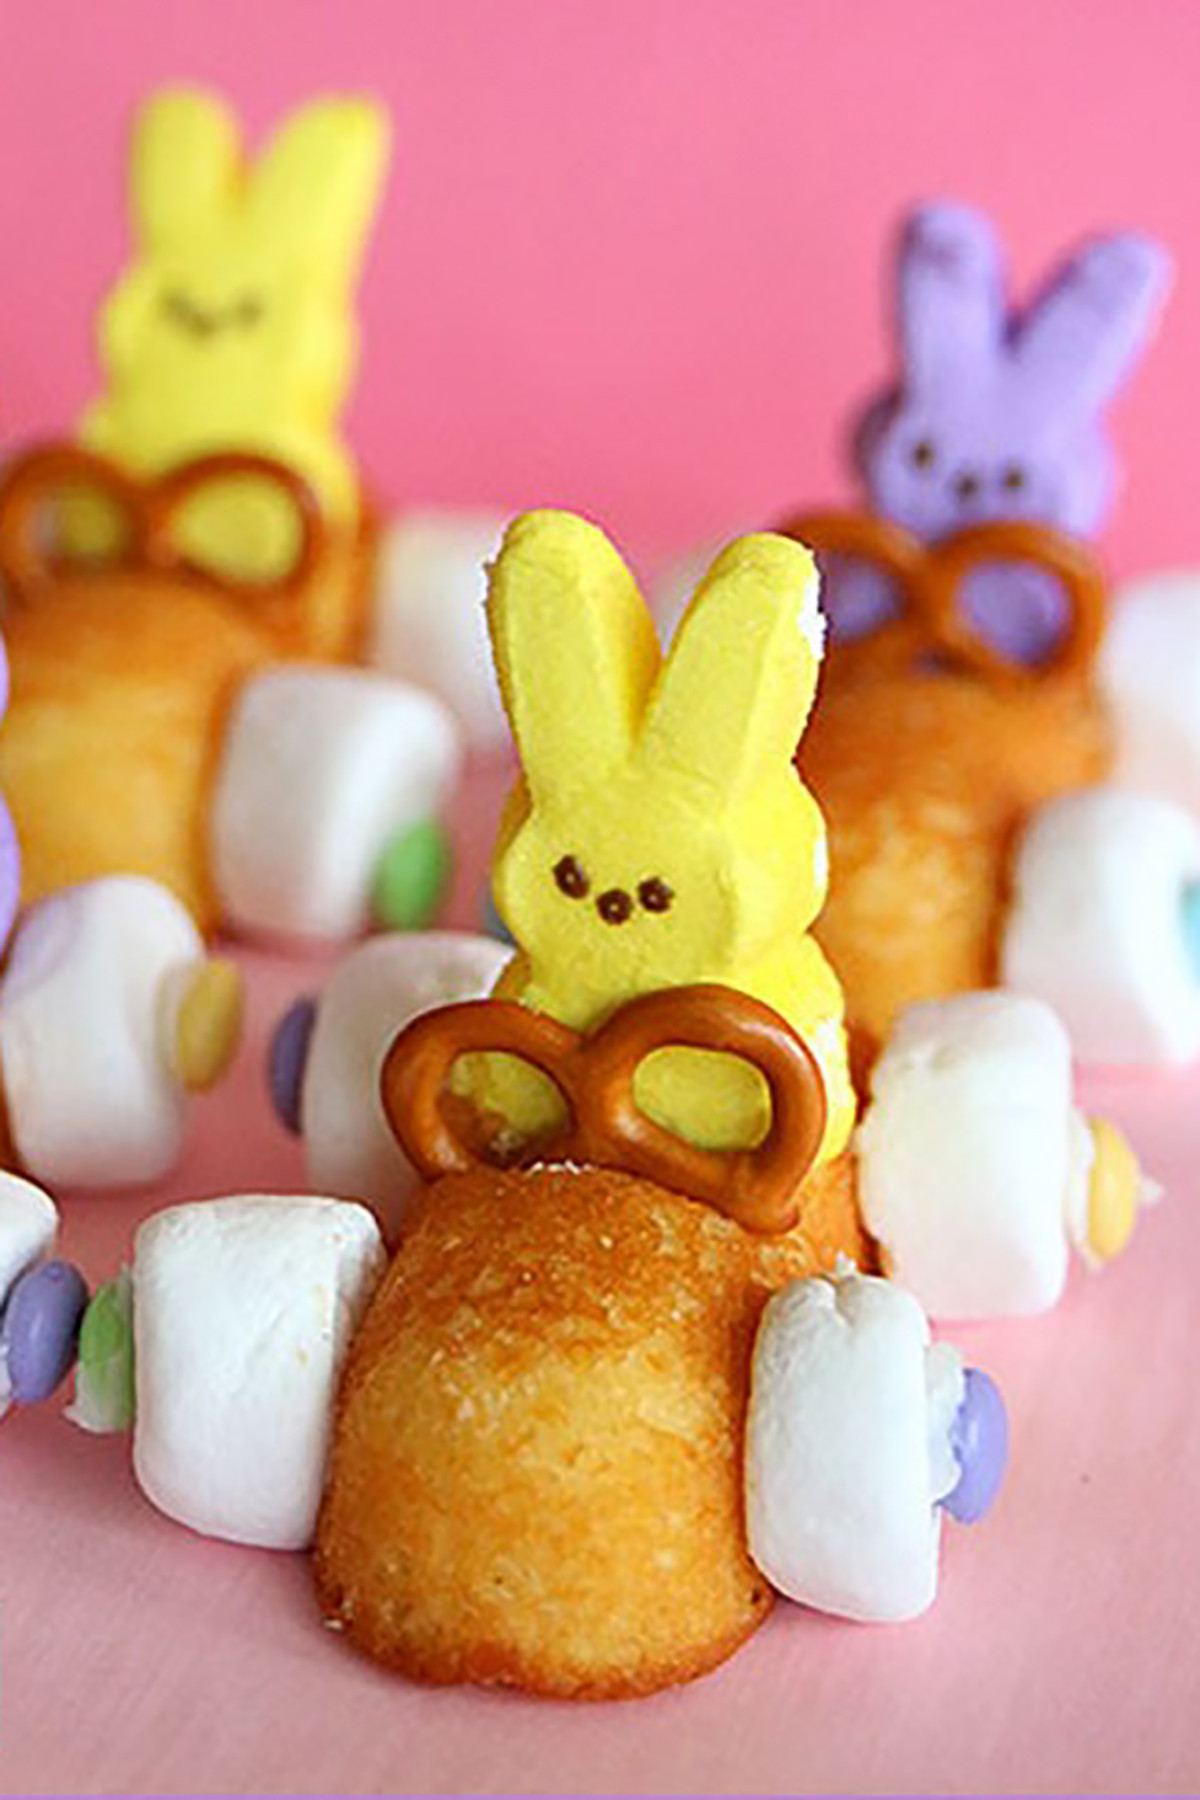 Fun Ideas For Easter
 15 Best Easter Snacks Easy and Cute Ideas for Easter